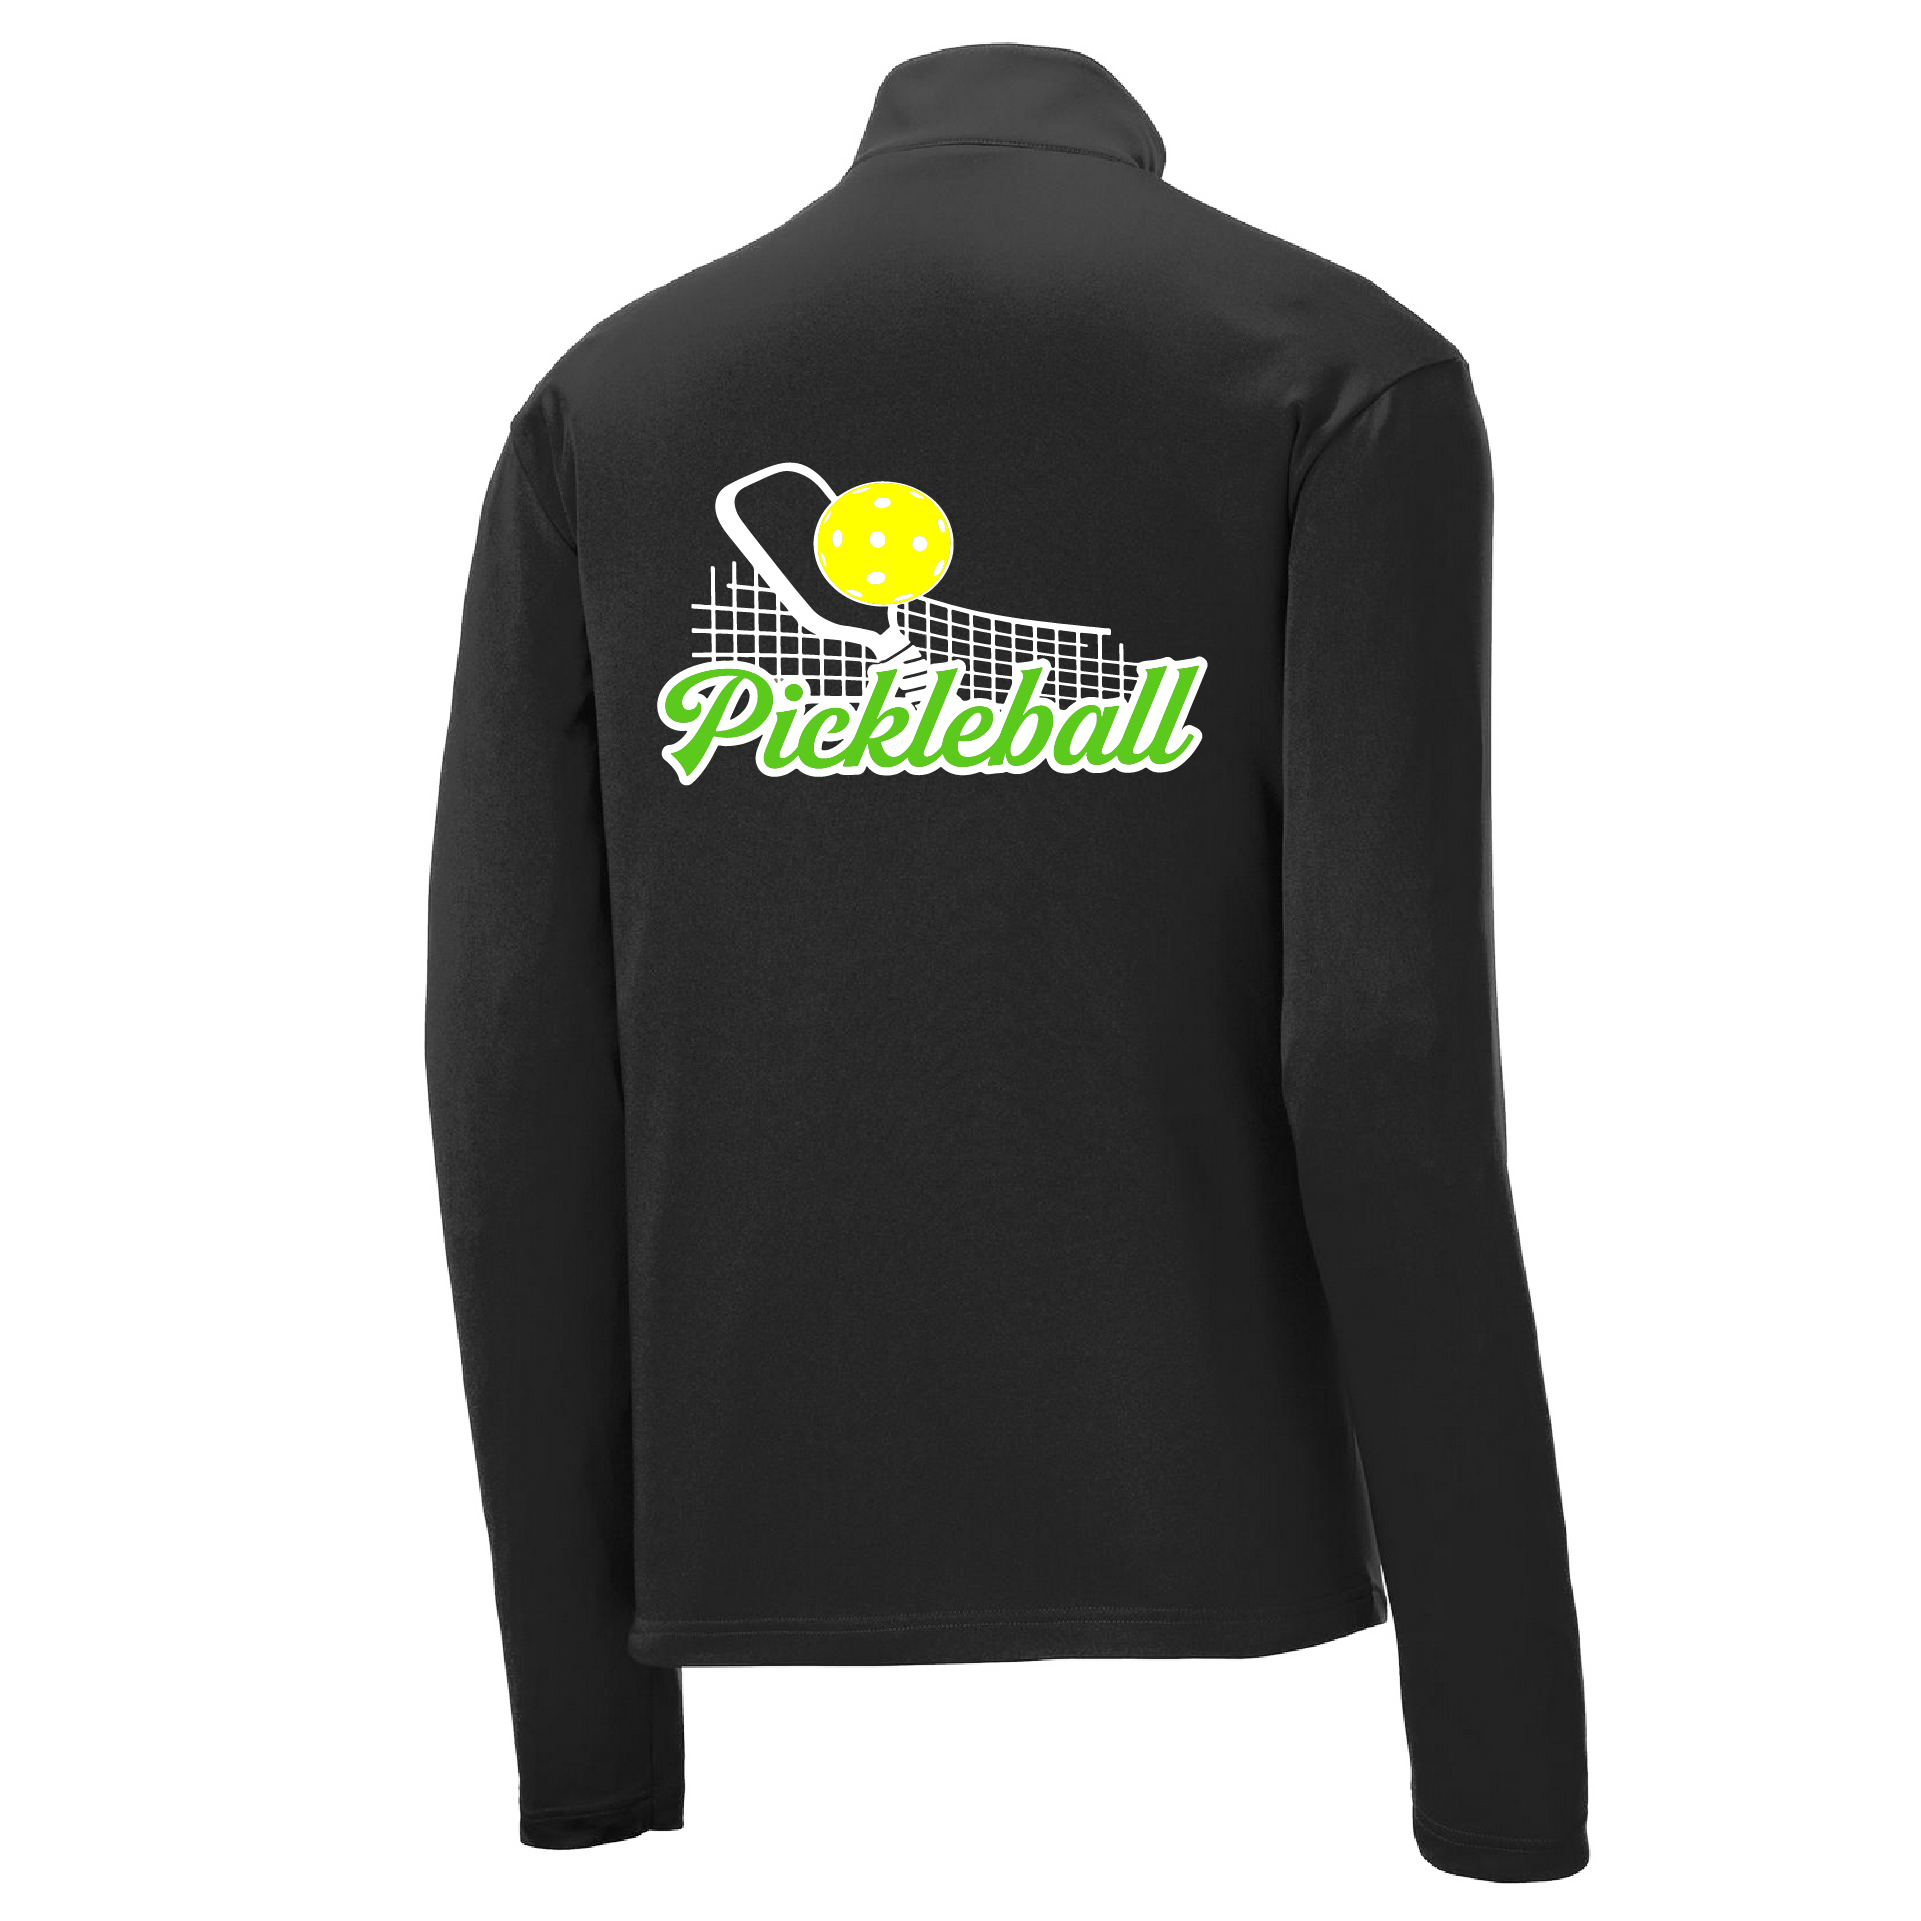 Pickleball Design: Pickleball Net  Men's 1/4-Zip Pullover  Turn up the volume in this Men's shirt with its perfect mix of softness and attitude. Material is ultra-comfortable with moisture wicking properties and tri-blend softness. PosiCharge technology locks in color. Highly breathable and lightweight. Versatile enough for wearing year-round.